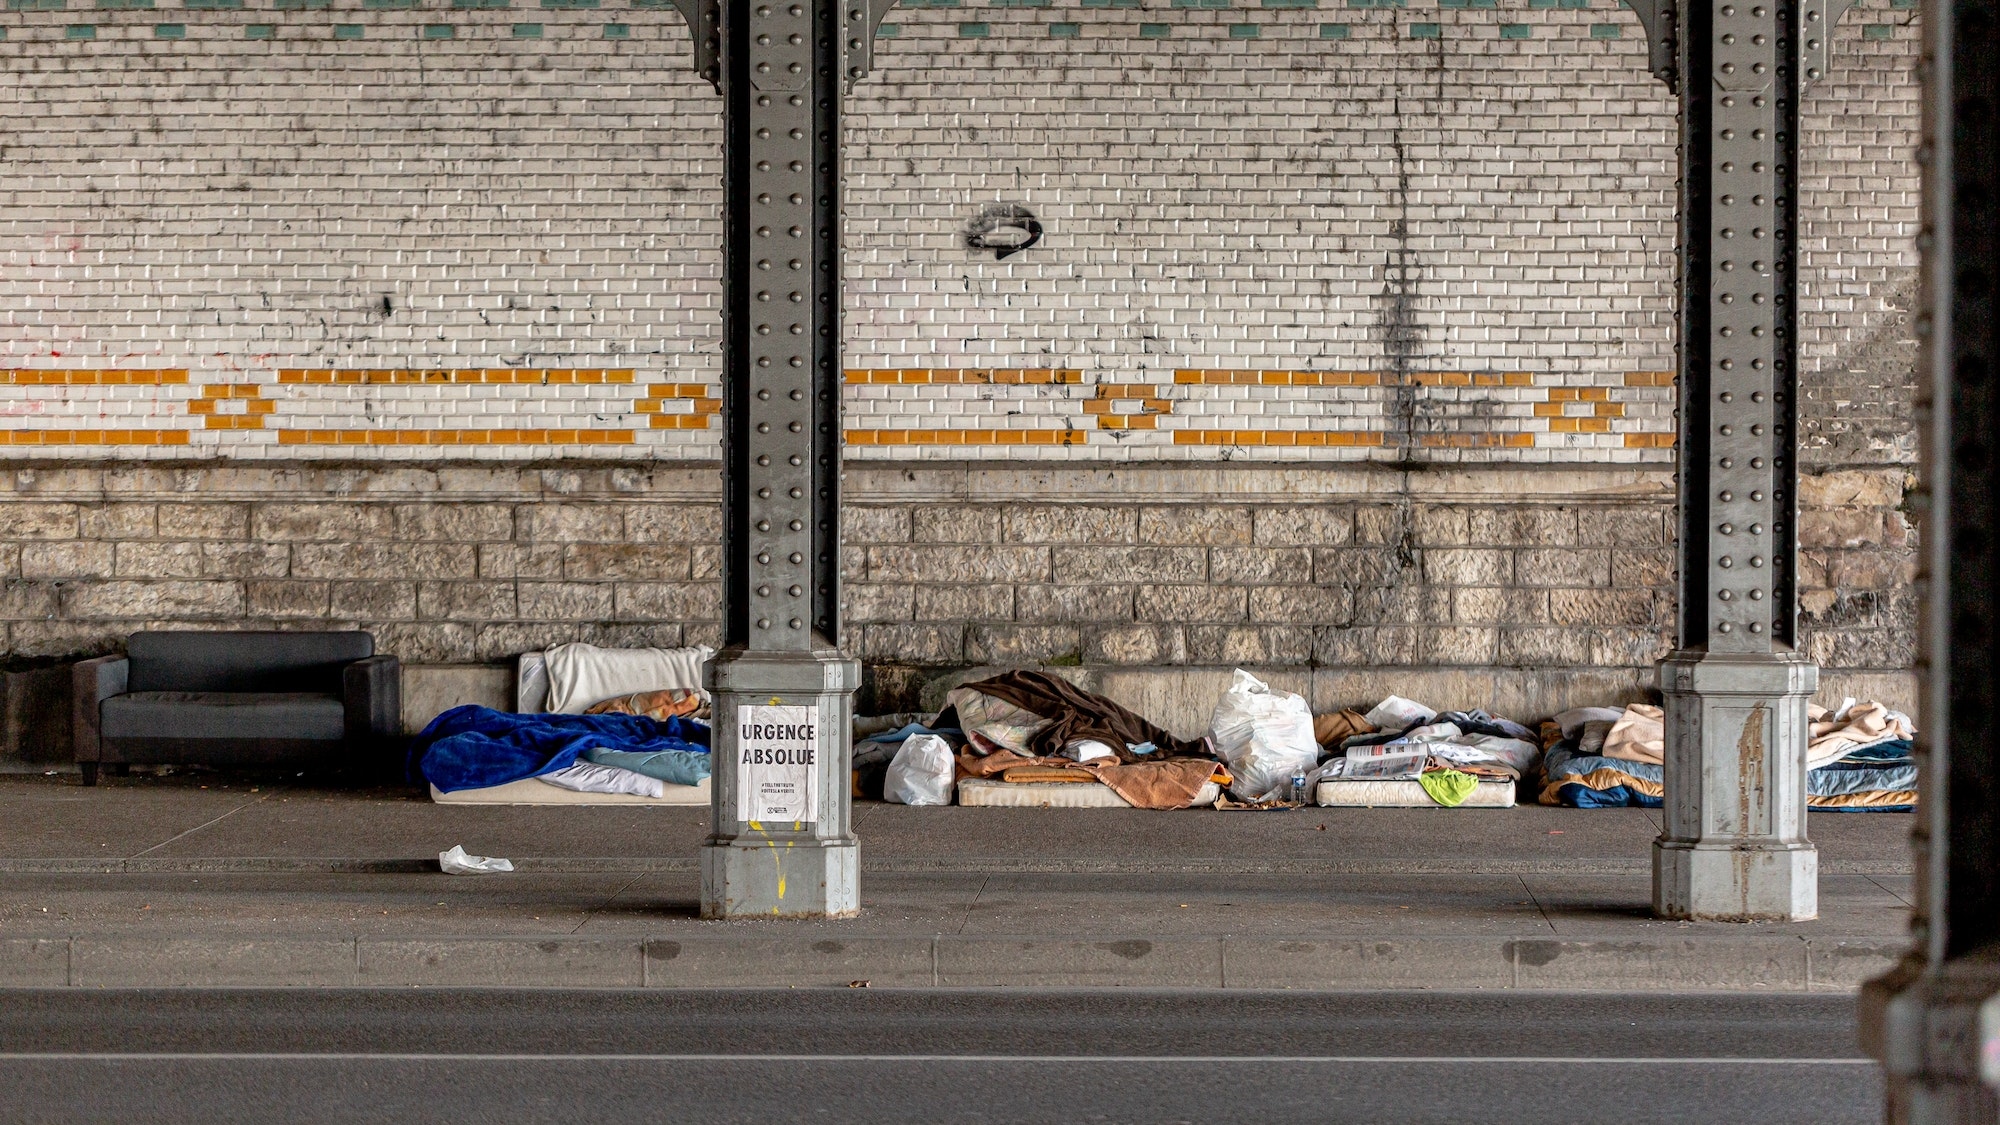 Homeless people beds under the bridge